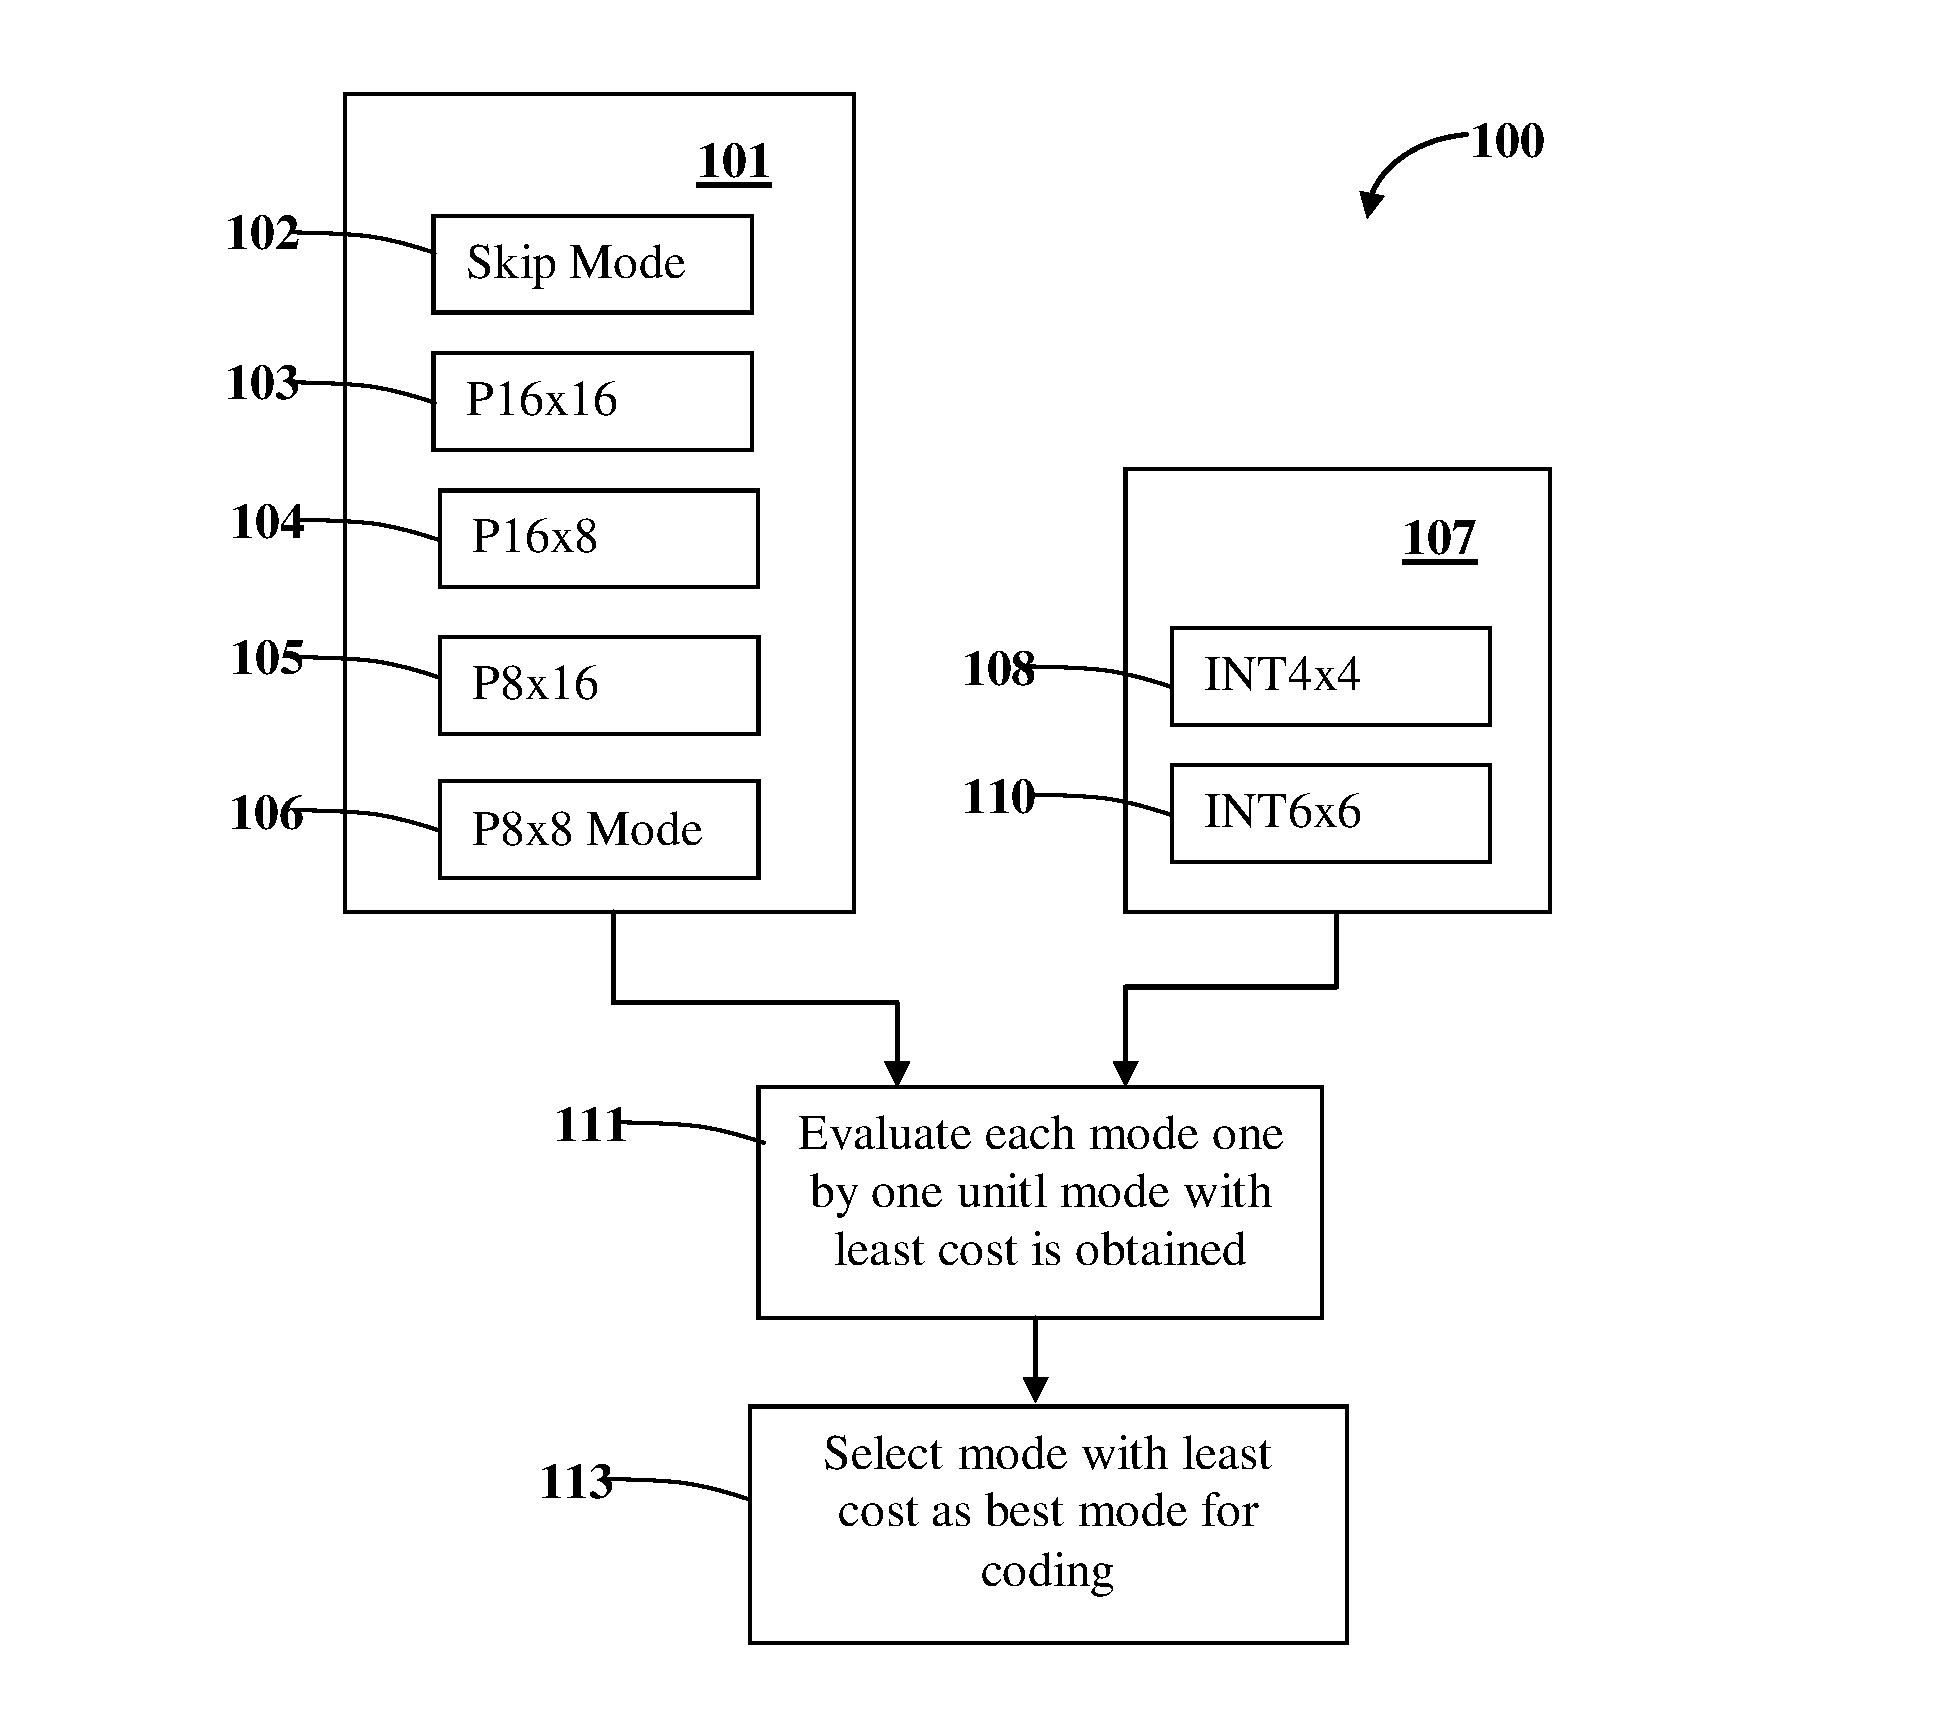 System and method for performing optimal temporal predictive mode decision in h.264 video coding